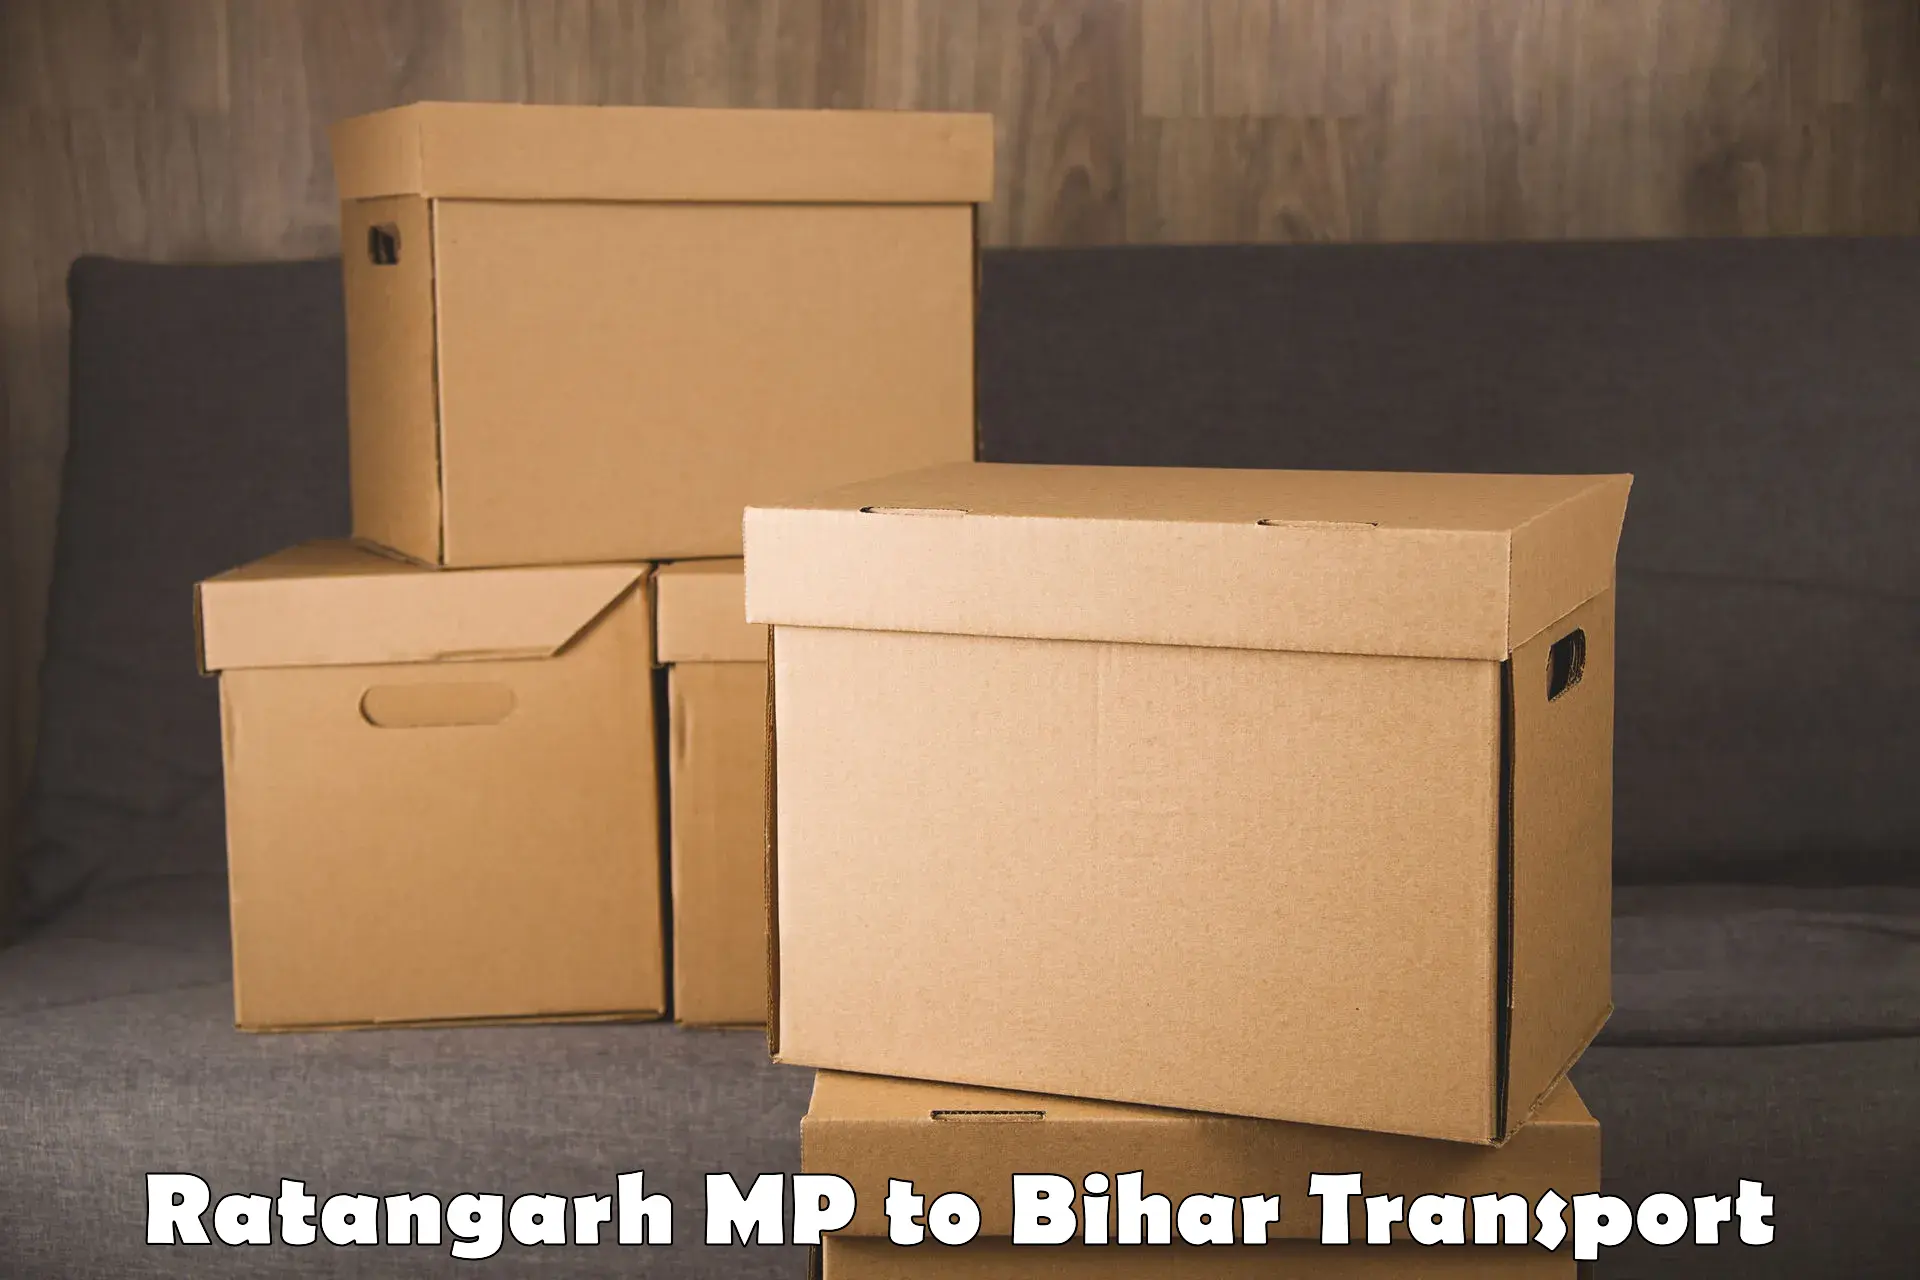 Air freight transport services in Ratangarh MP to Dighwara